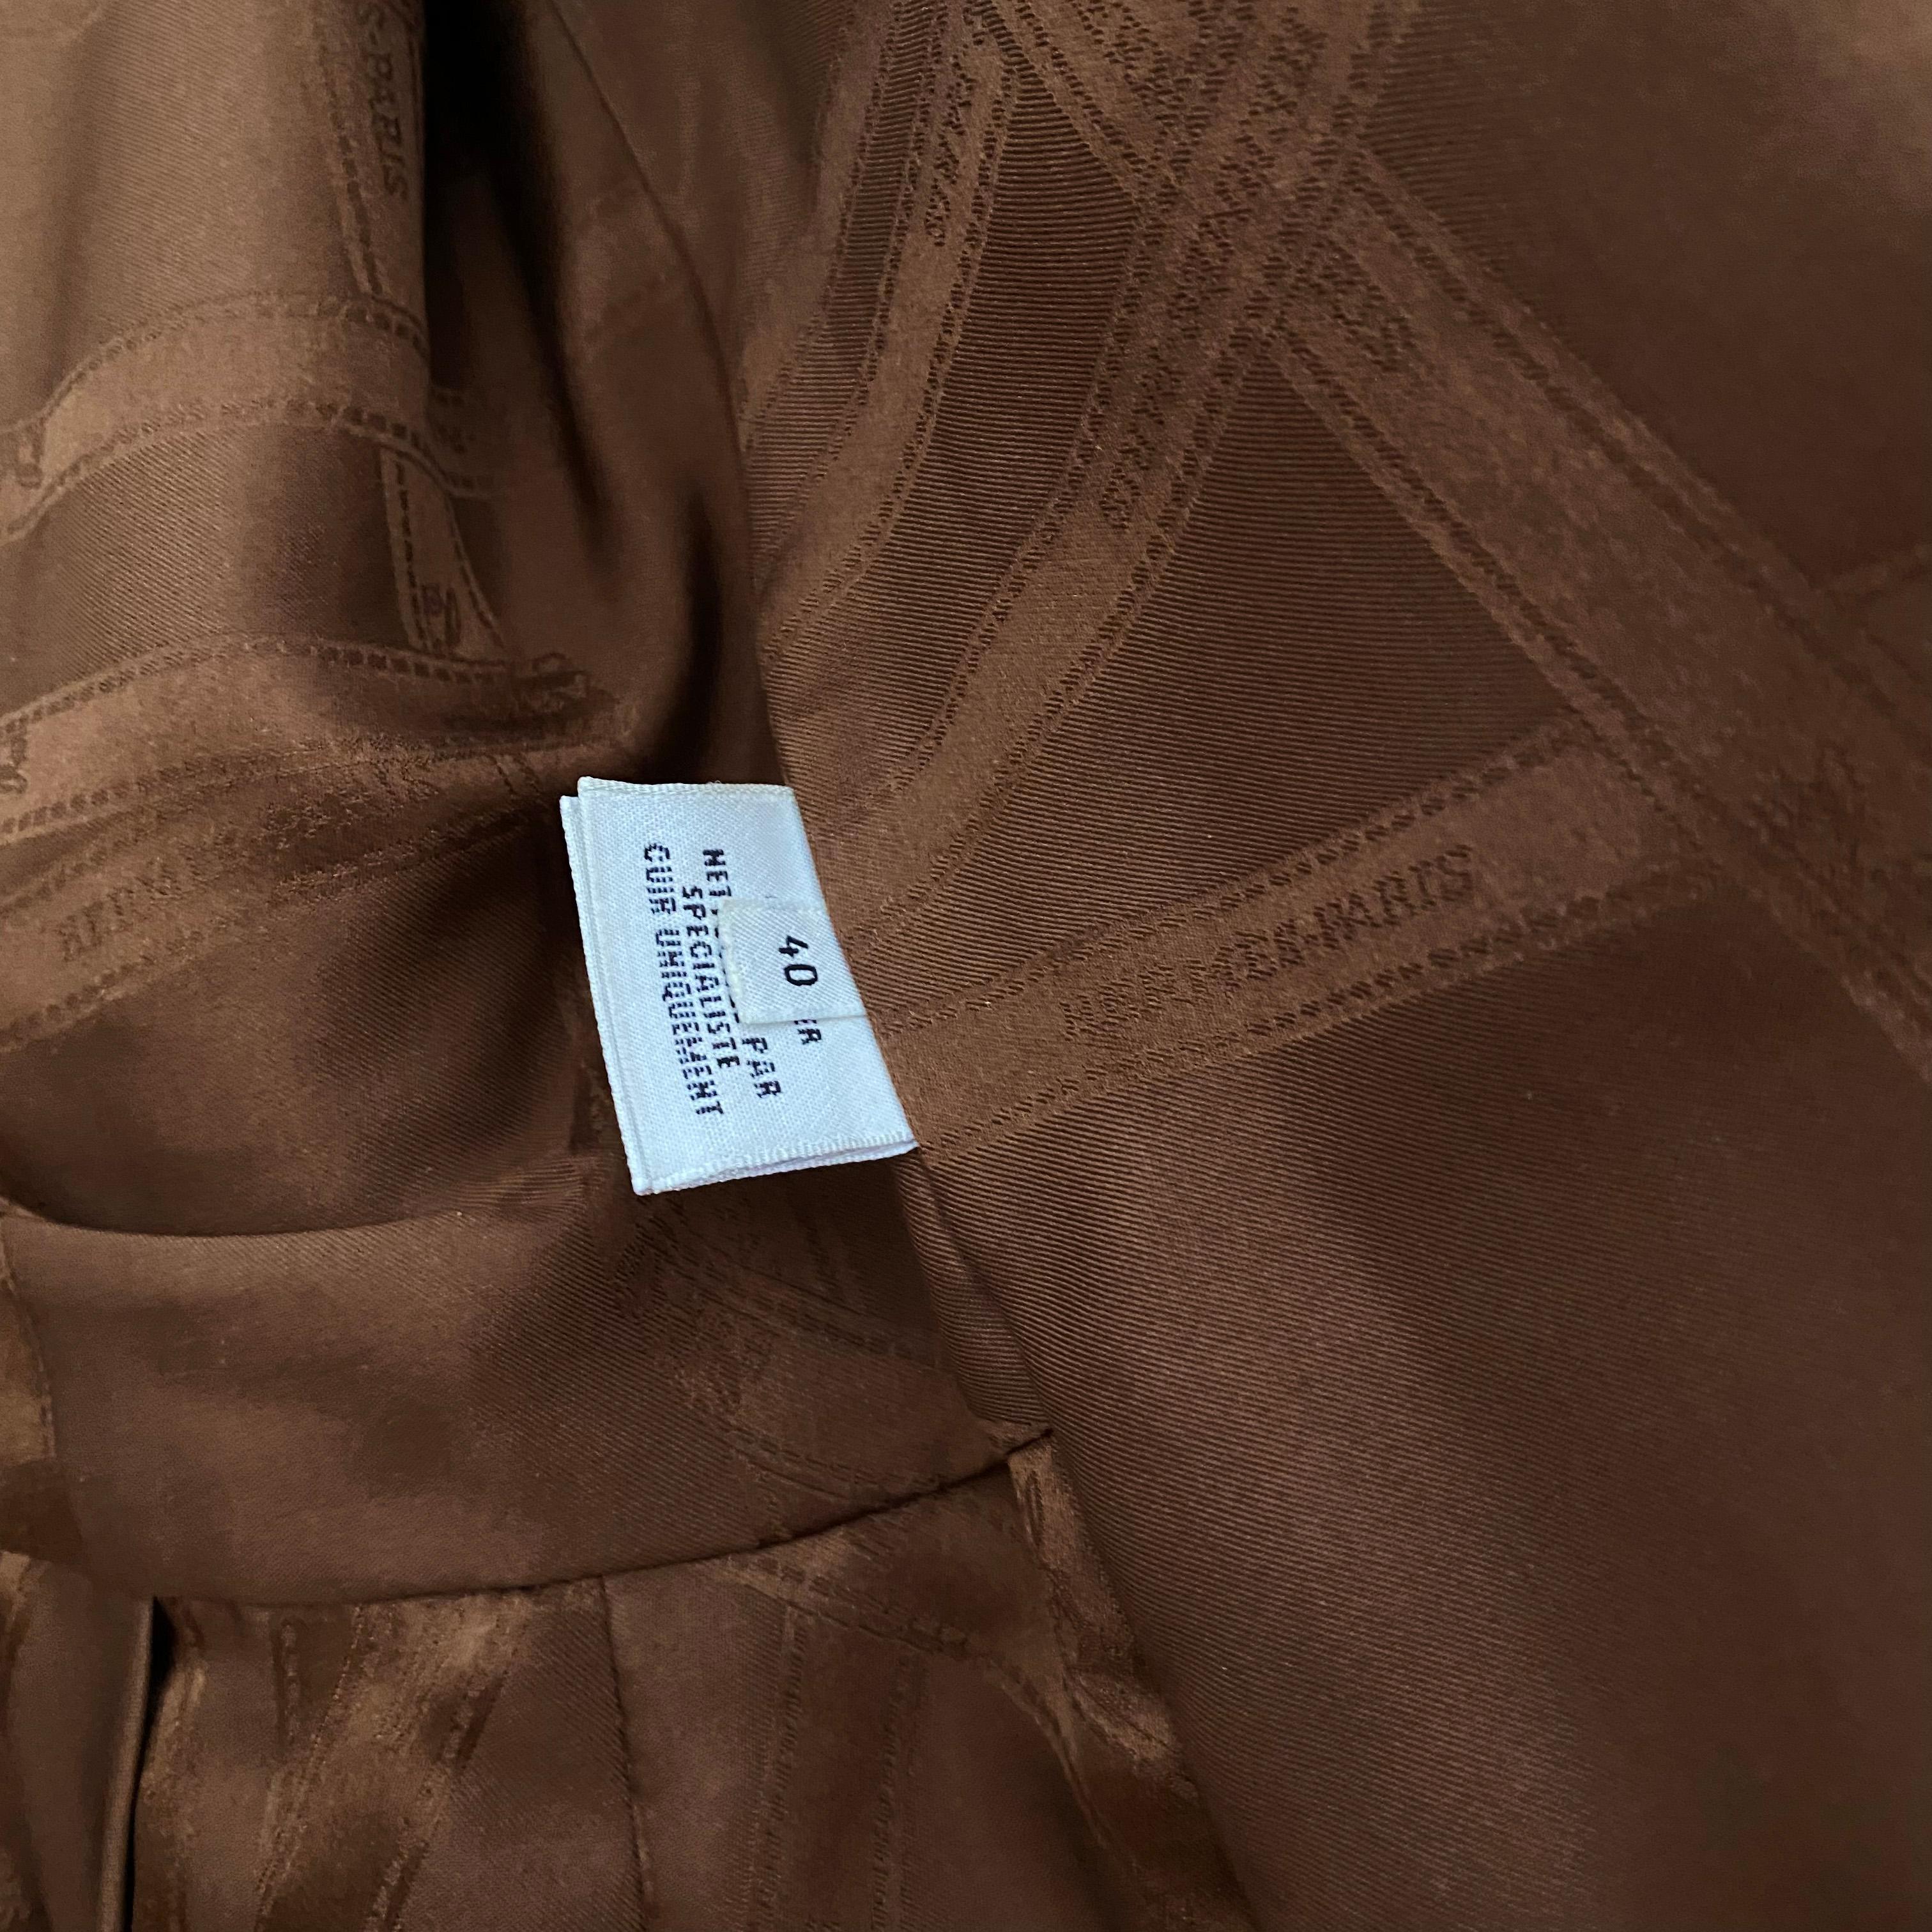 Hermès Saddle Leather Safari Biker Jacket with Logo Buttons and Silk Lining In Excellent Condition For Sale In Boston, MA